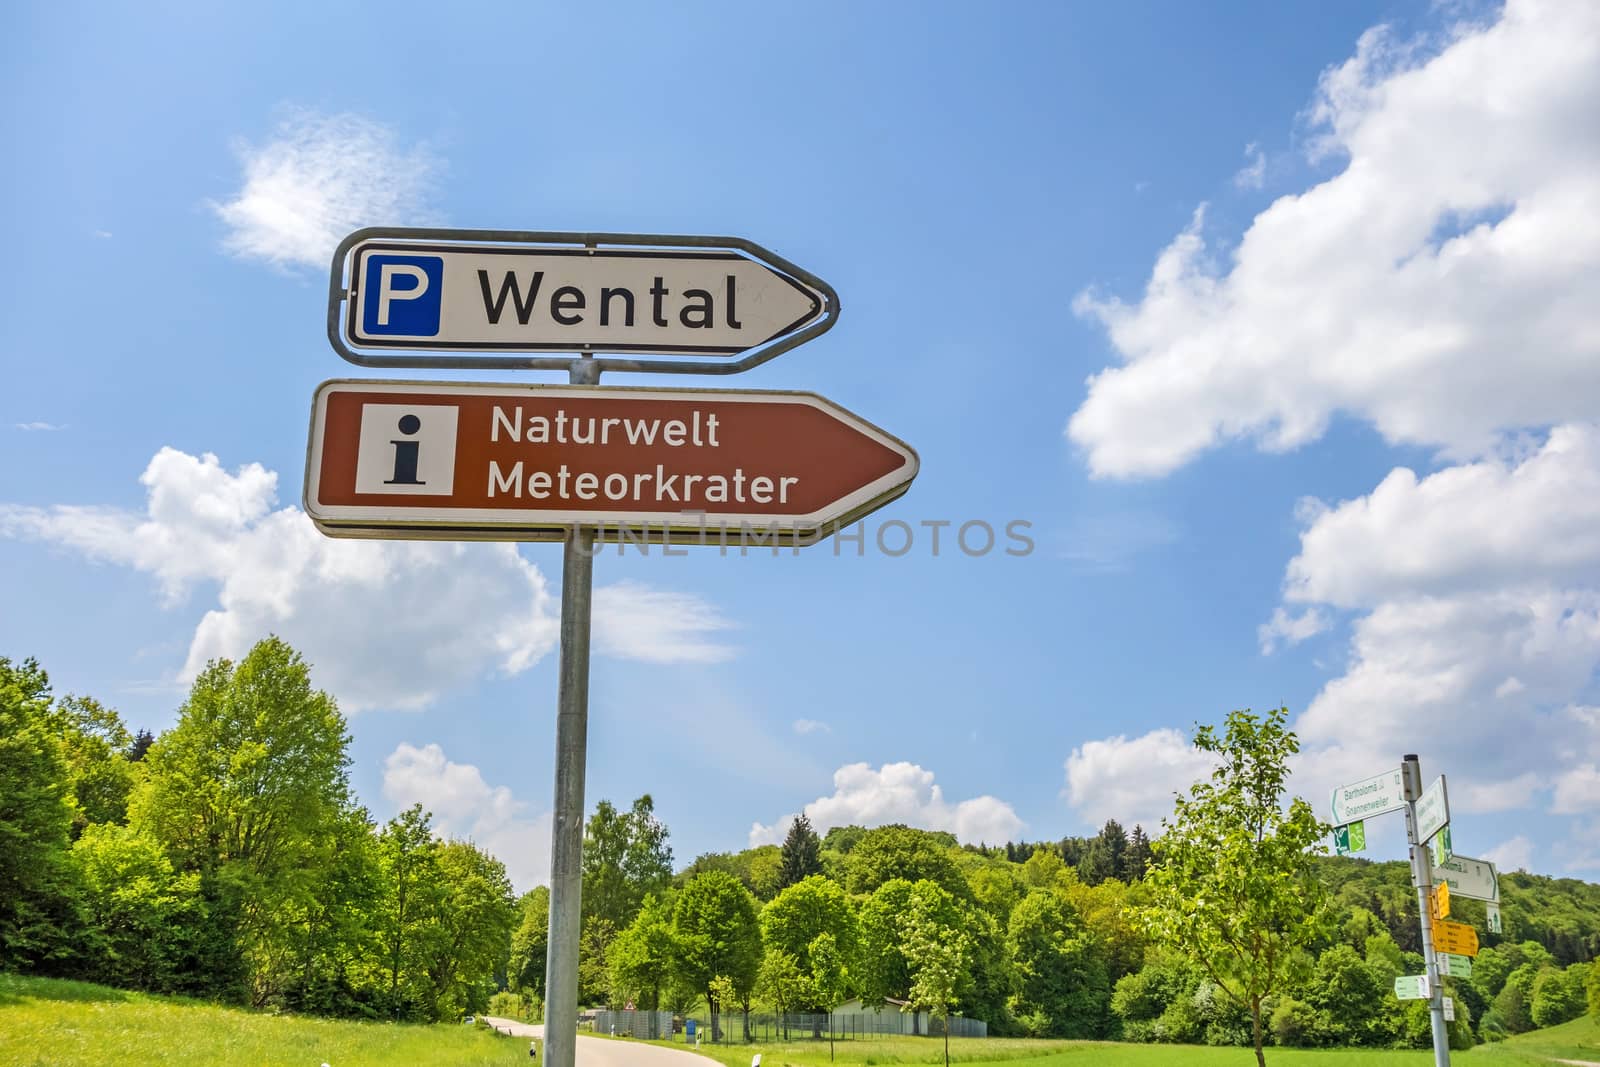 Steinheim, Wental, Germany - May 26, 2016: Wental valley signpost showing way to information center "Naturwelt Meteorcrater" and parking lot